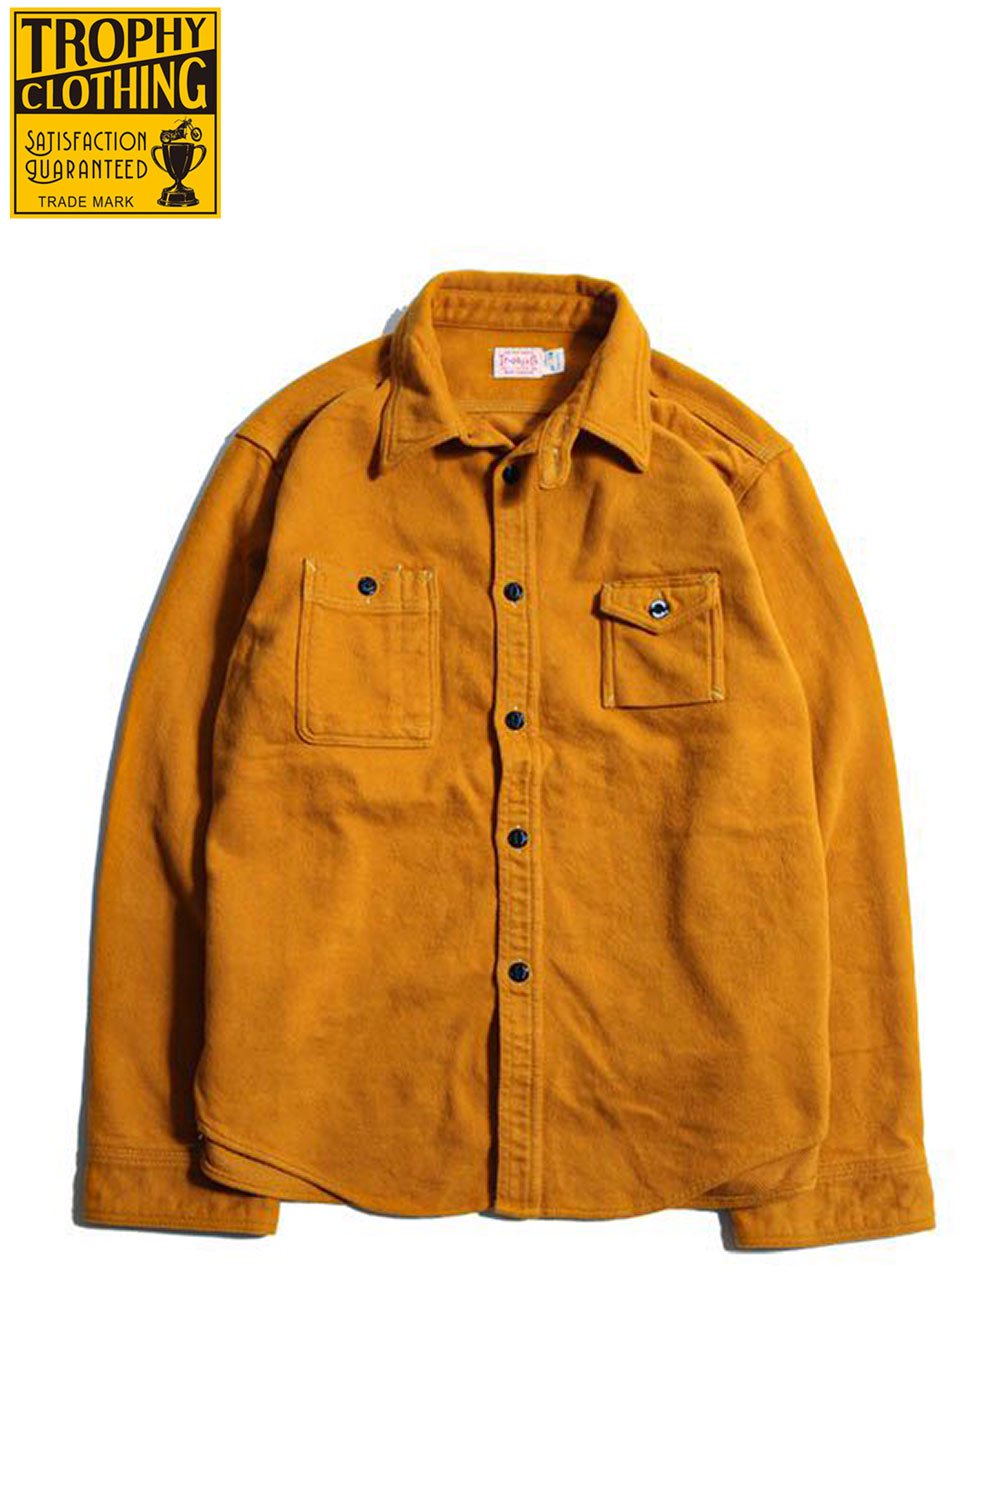 TROPHY CLOTHING(トロフィークロージング) フランネルシャツ MACHINE AGE FLANNEL SHIRT TR21AW-403  通販正規取扱 | ハーレムストア公式通販サイト